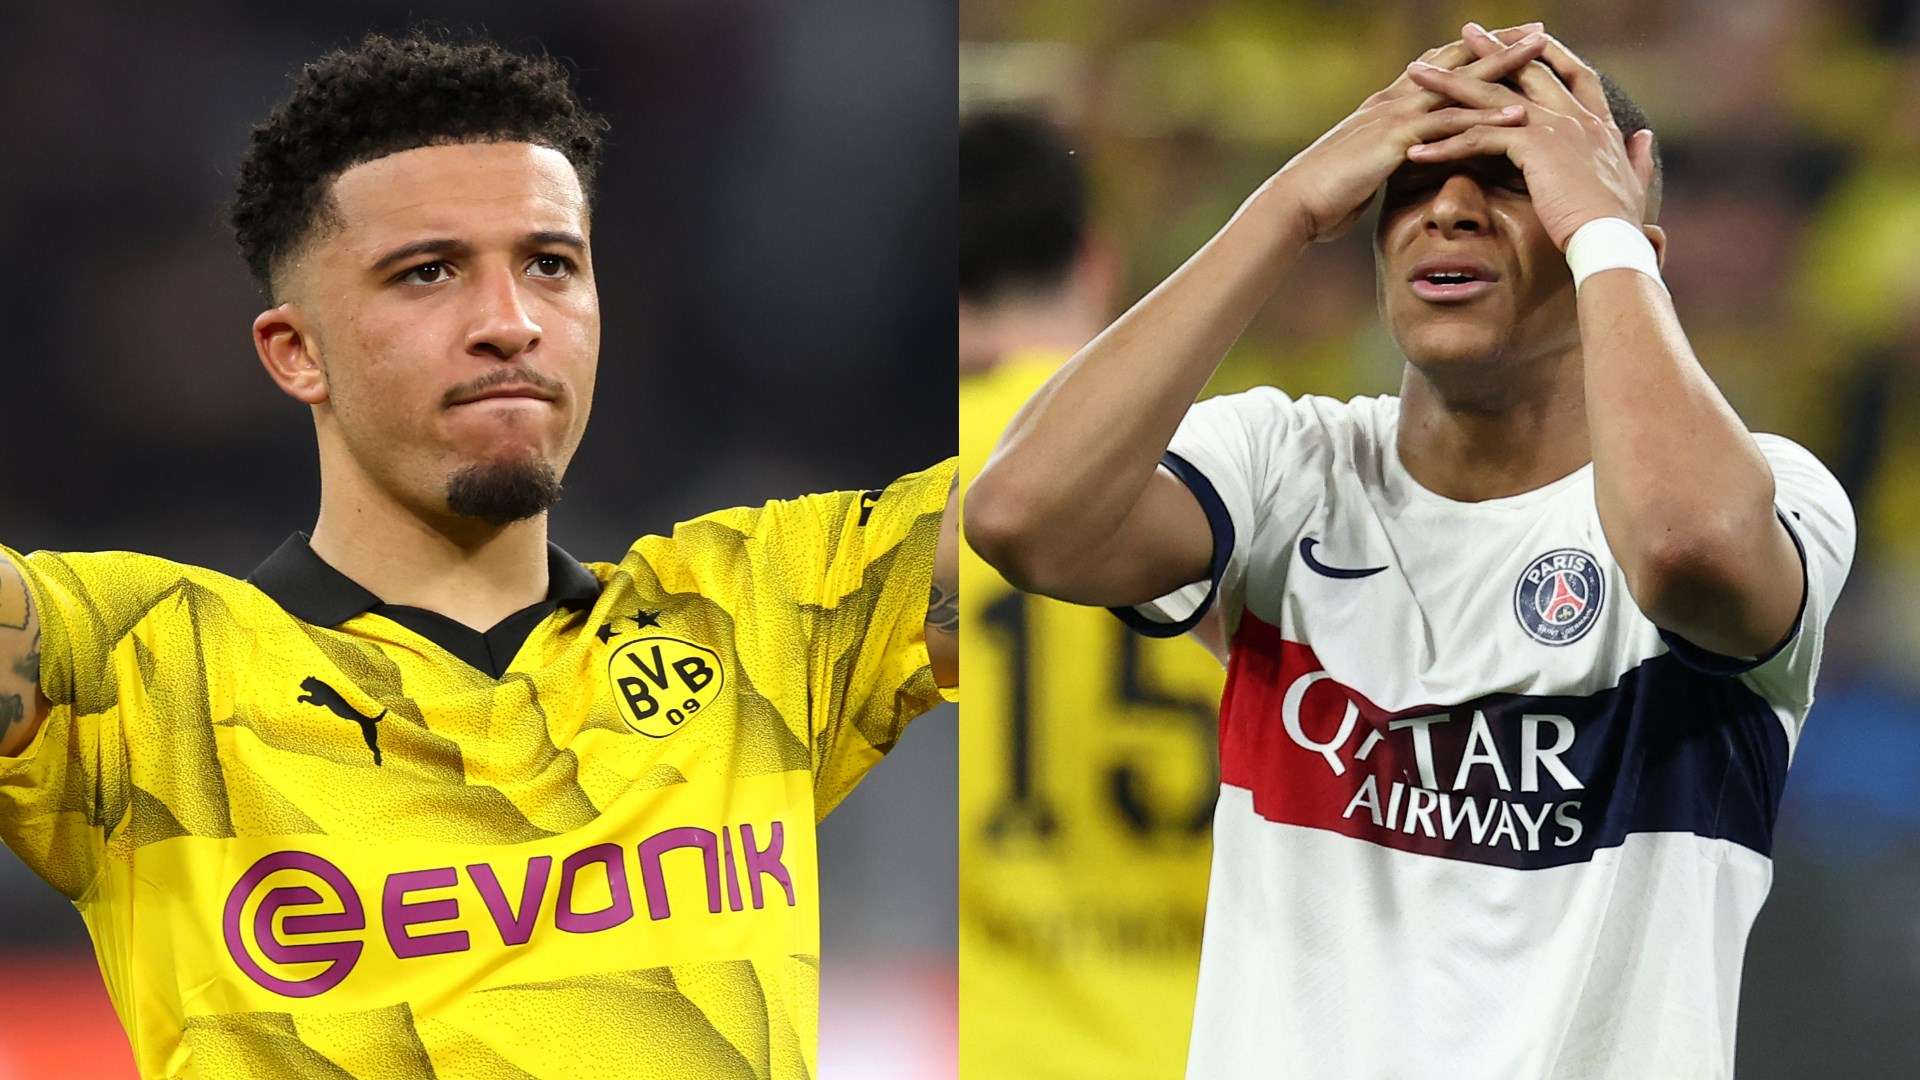 Welcome back, Jadon Sancho! Winners and losers as Man Utd loanee lights up  Champions League semi-final to overshadow constricted Kylian Mbappe and  help Borussia Dortmund edge out PSG in thrilling first leg |